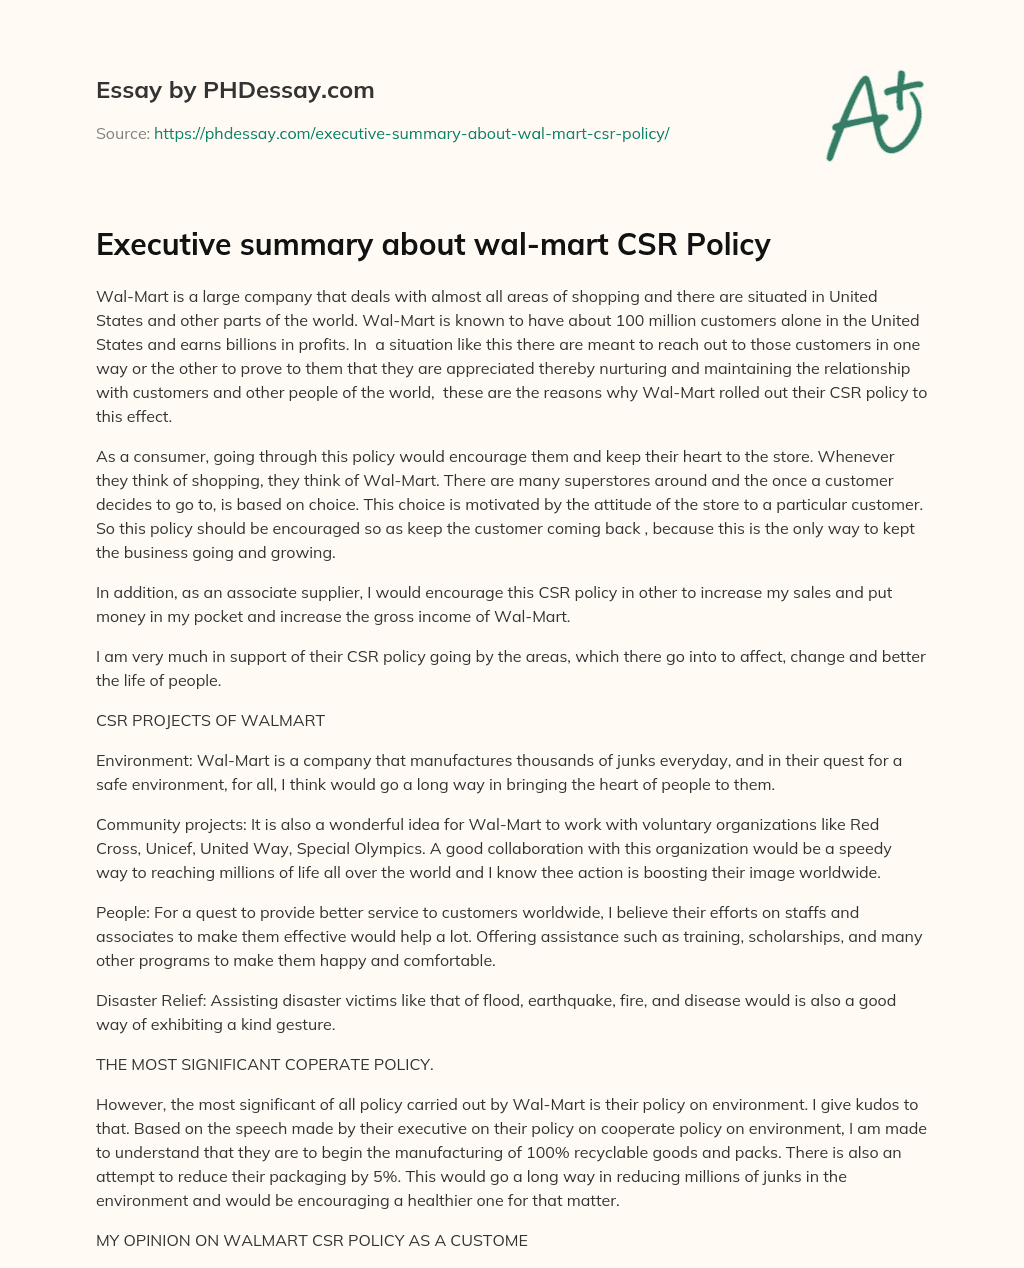 Executive summary about walmart CSR Policy